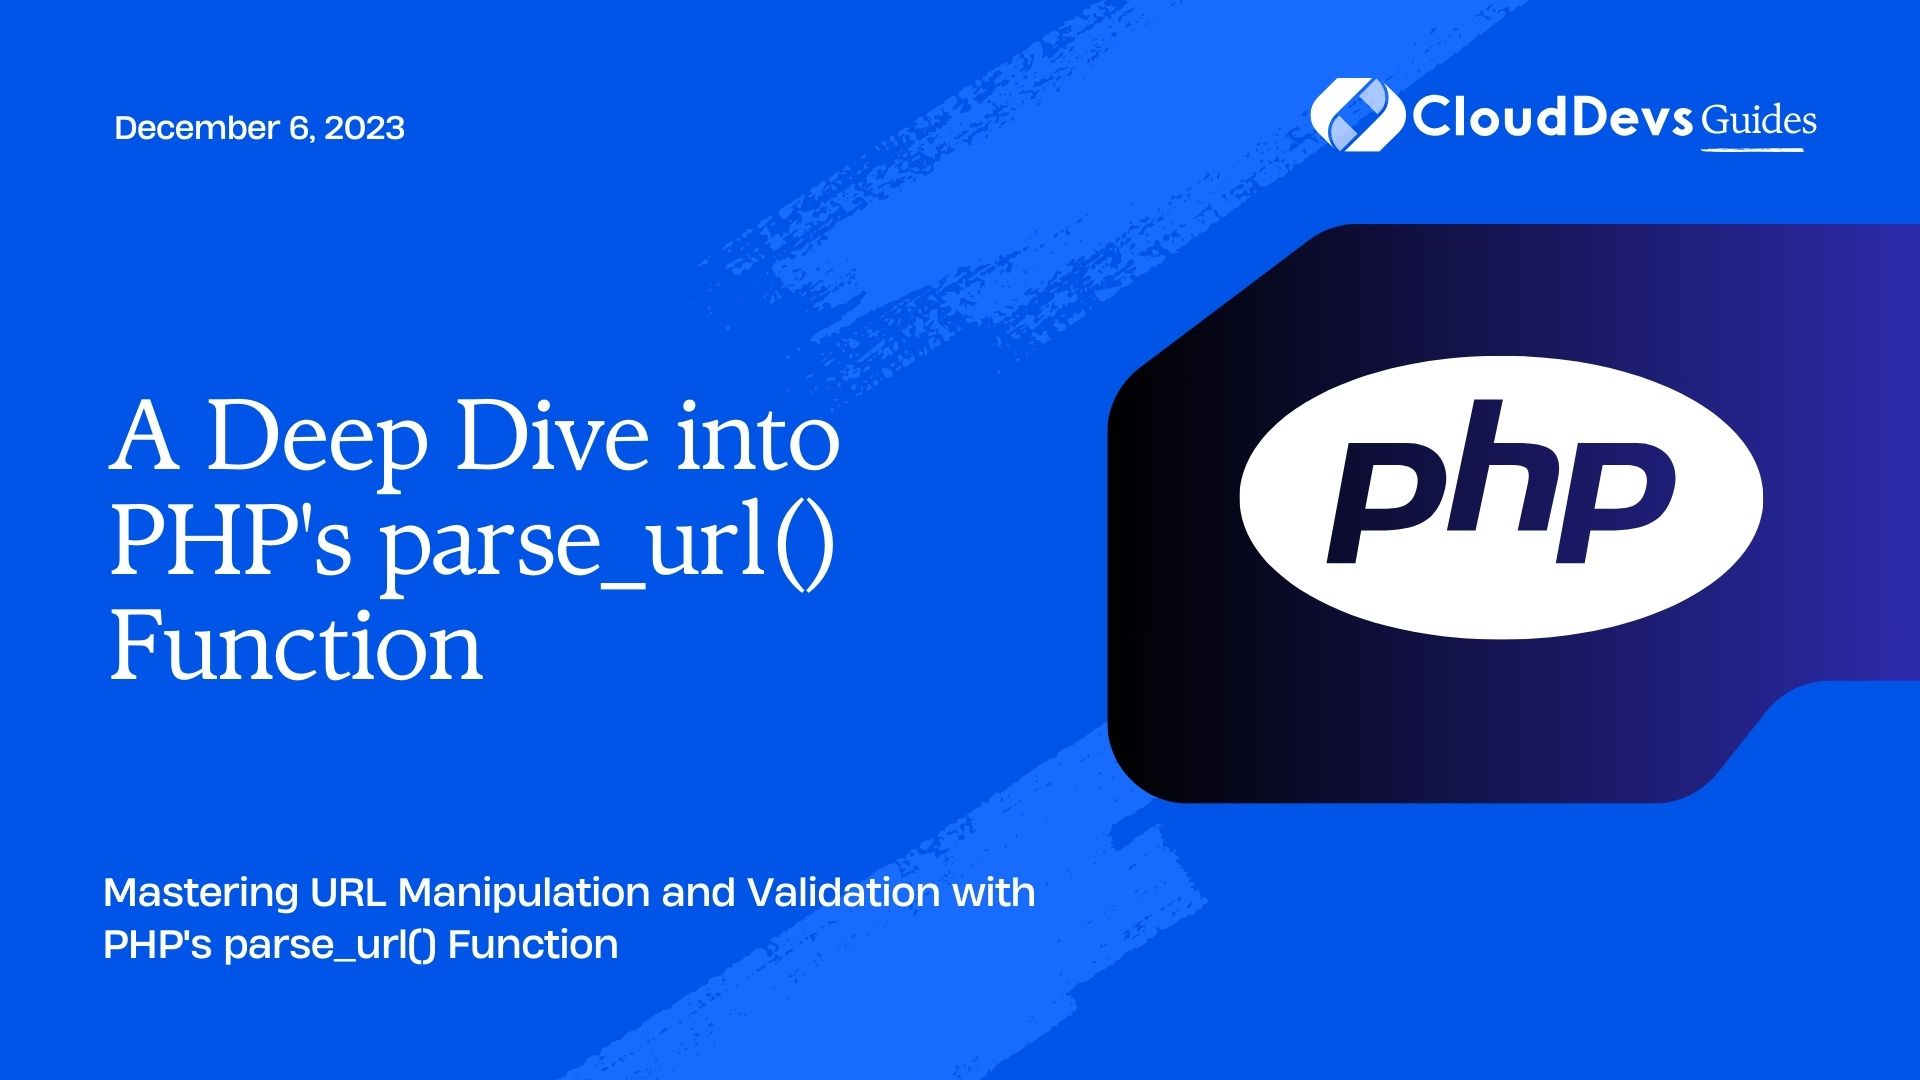 A Deep Dive into PHP's parse_url() Function